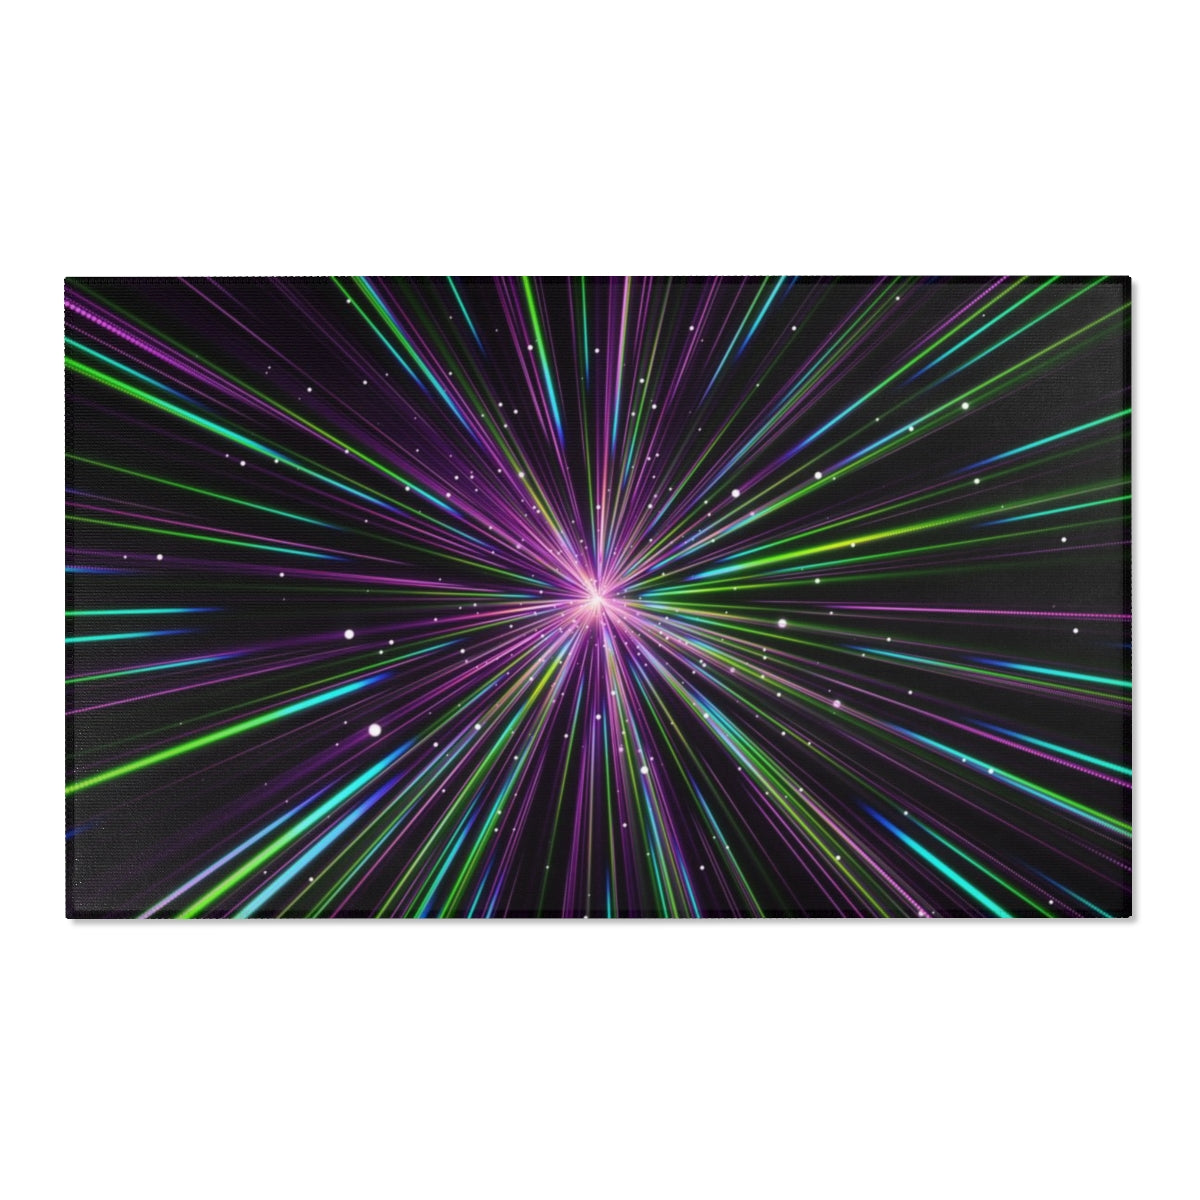 Hyperspace Area Rug Carpet, Arcade 90s 80s Space Galaxy Home Floor Decor Chic 2x3 4x6 3x5 Designer Kids Game Room Decorative Patio Mat Starcove Fashion